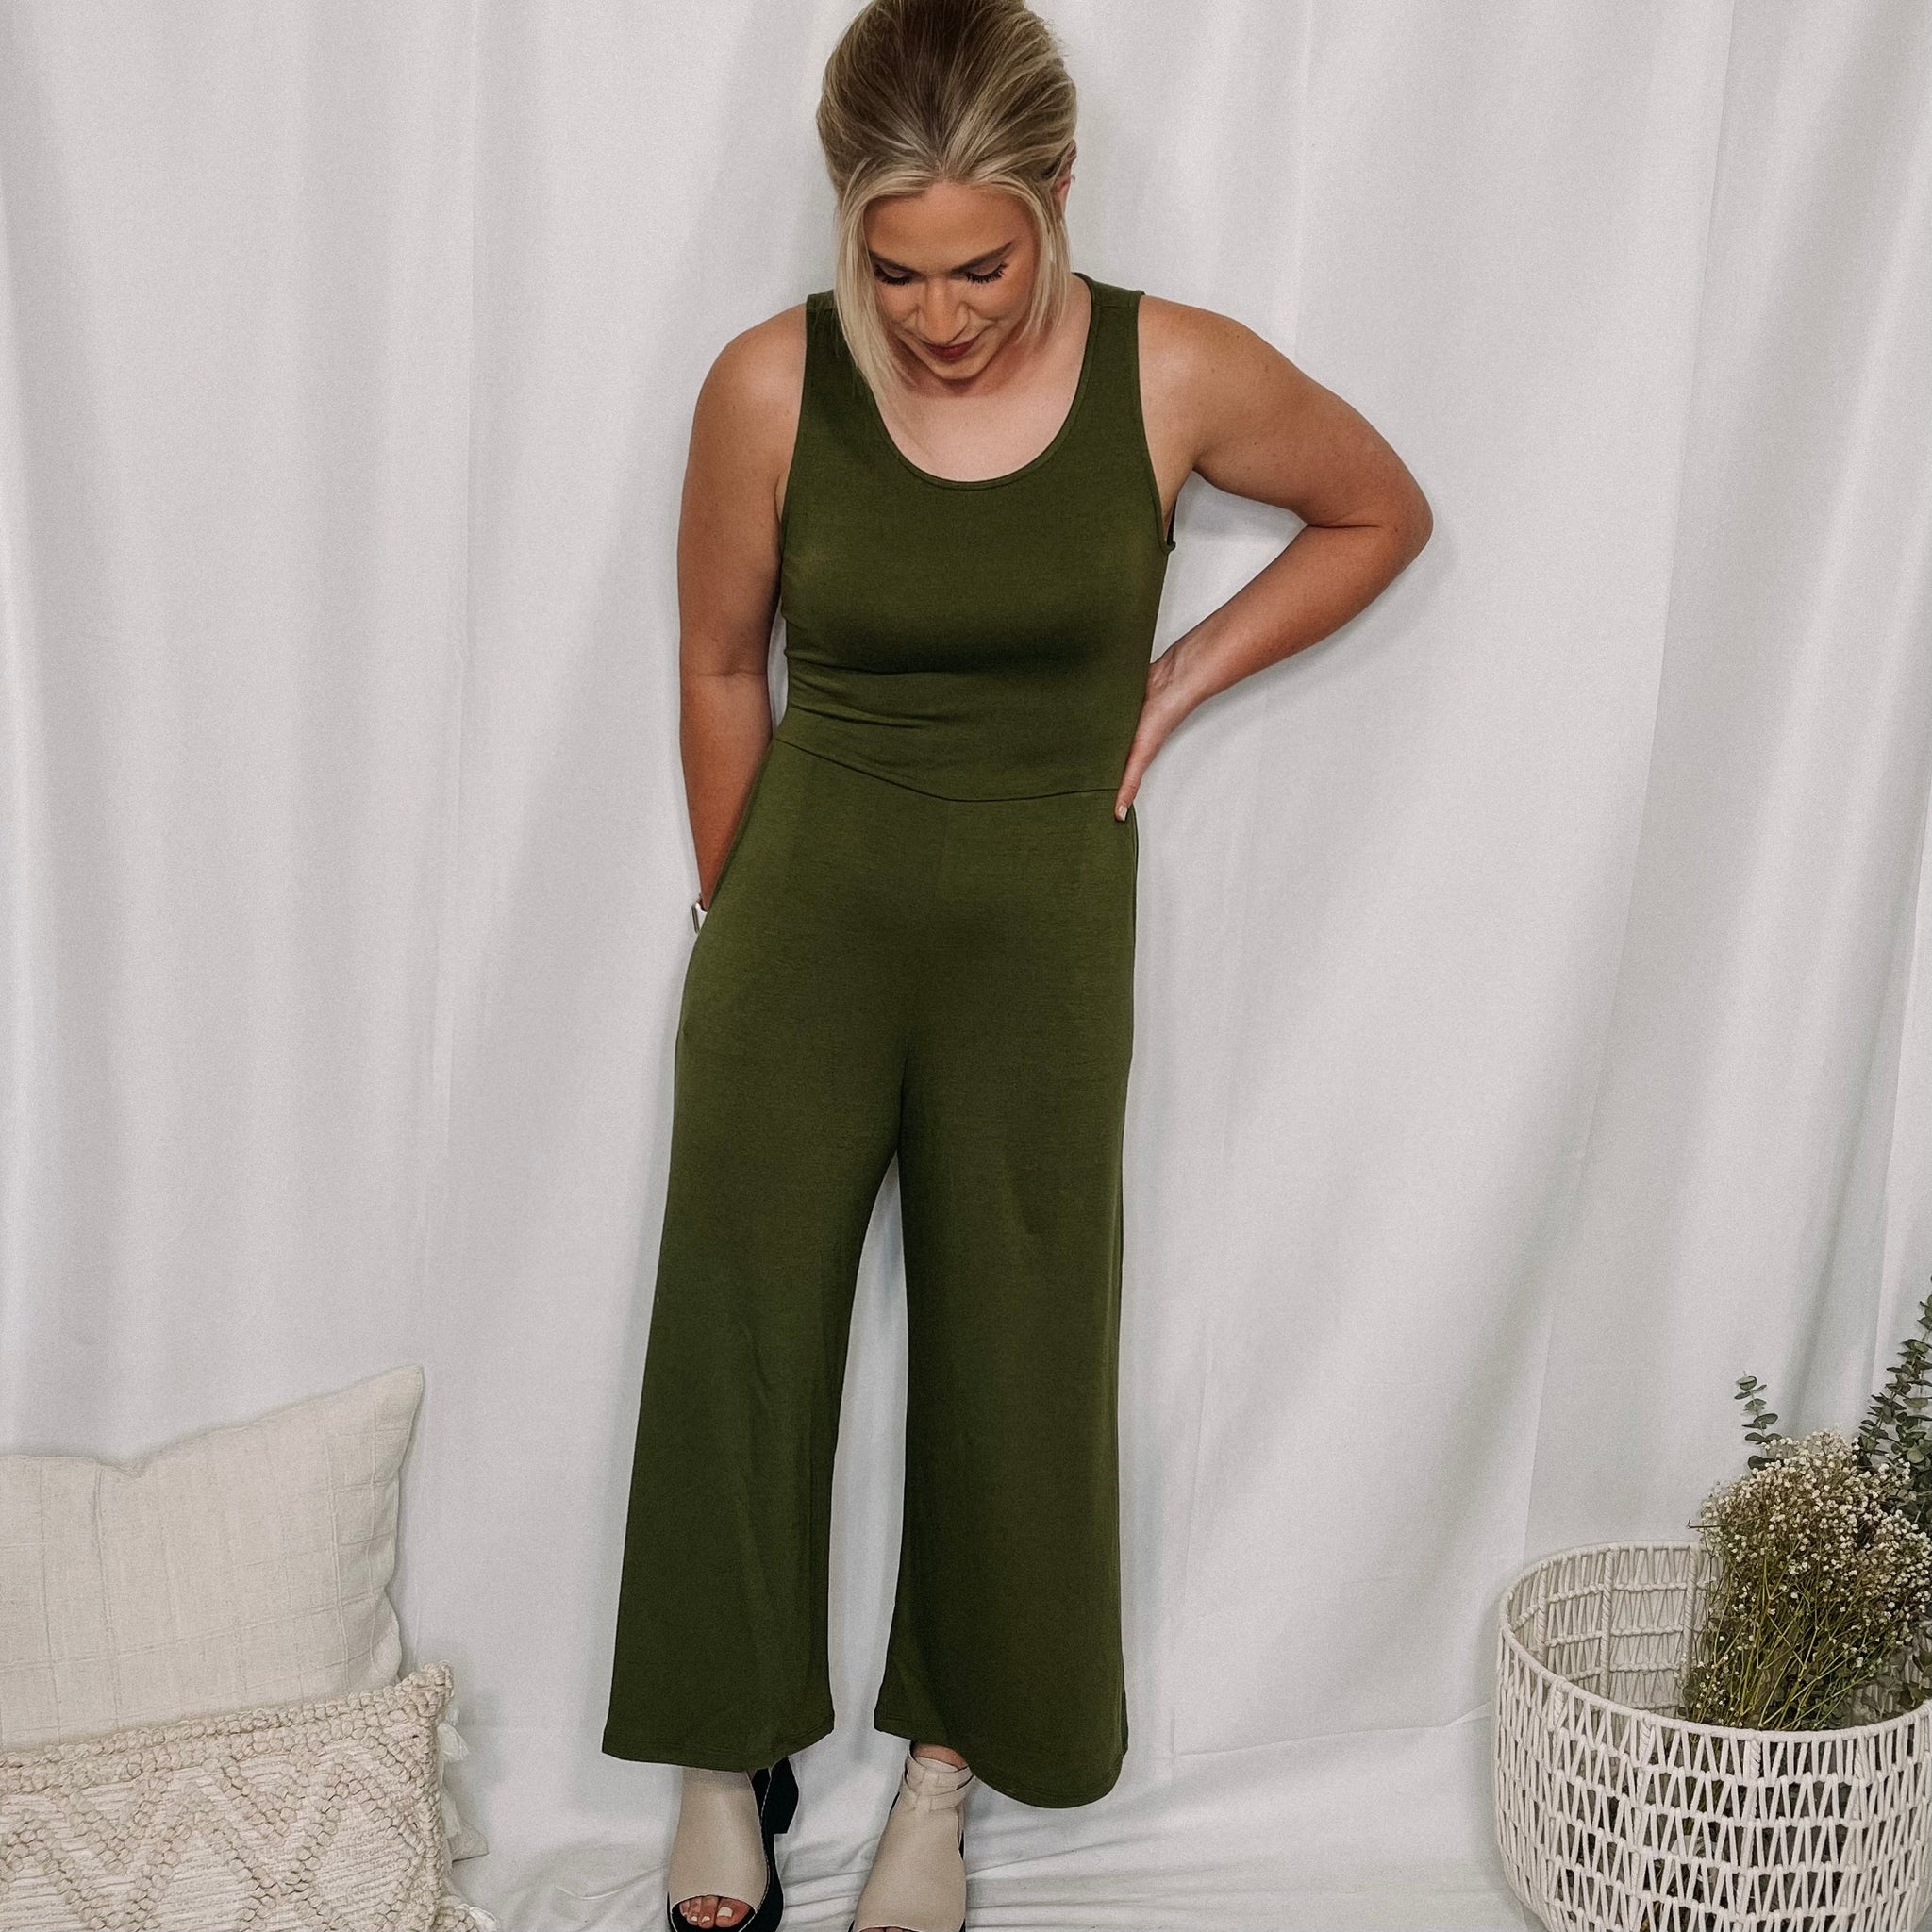 Back To You Cutout Jumpsuit - LAST ONE